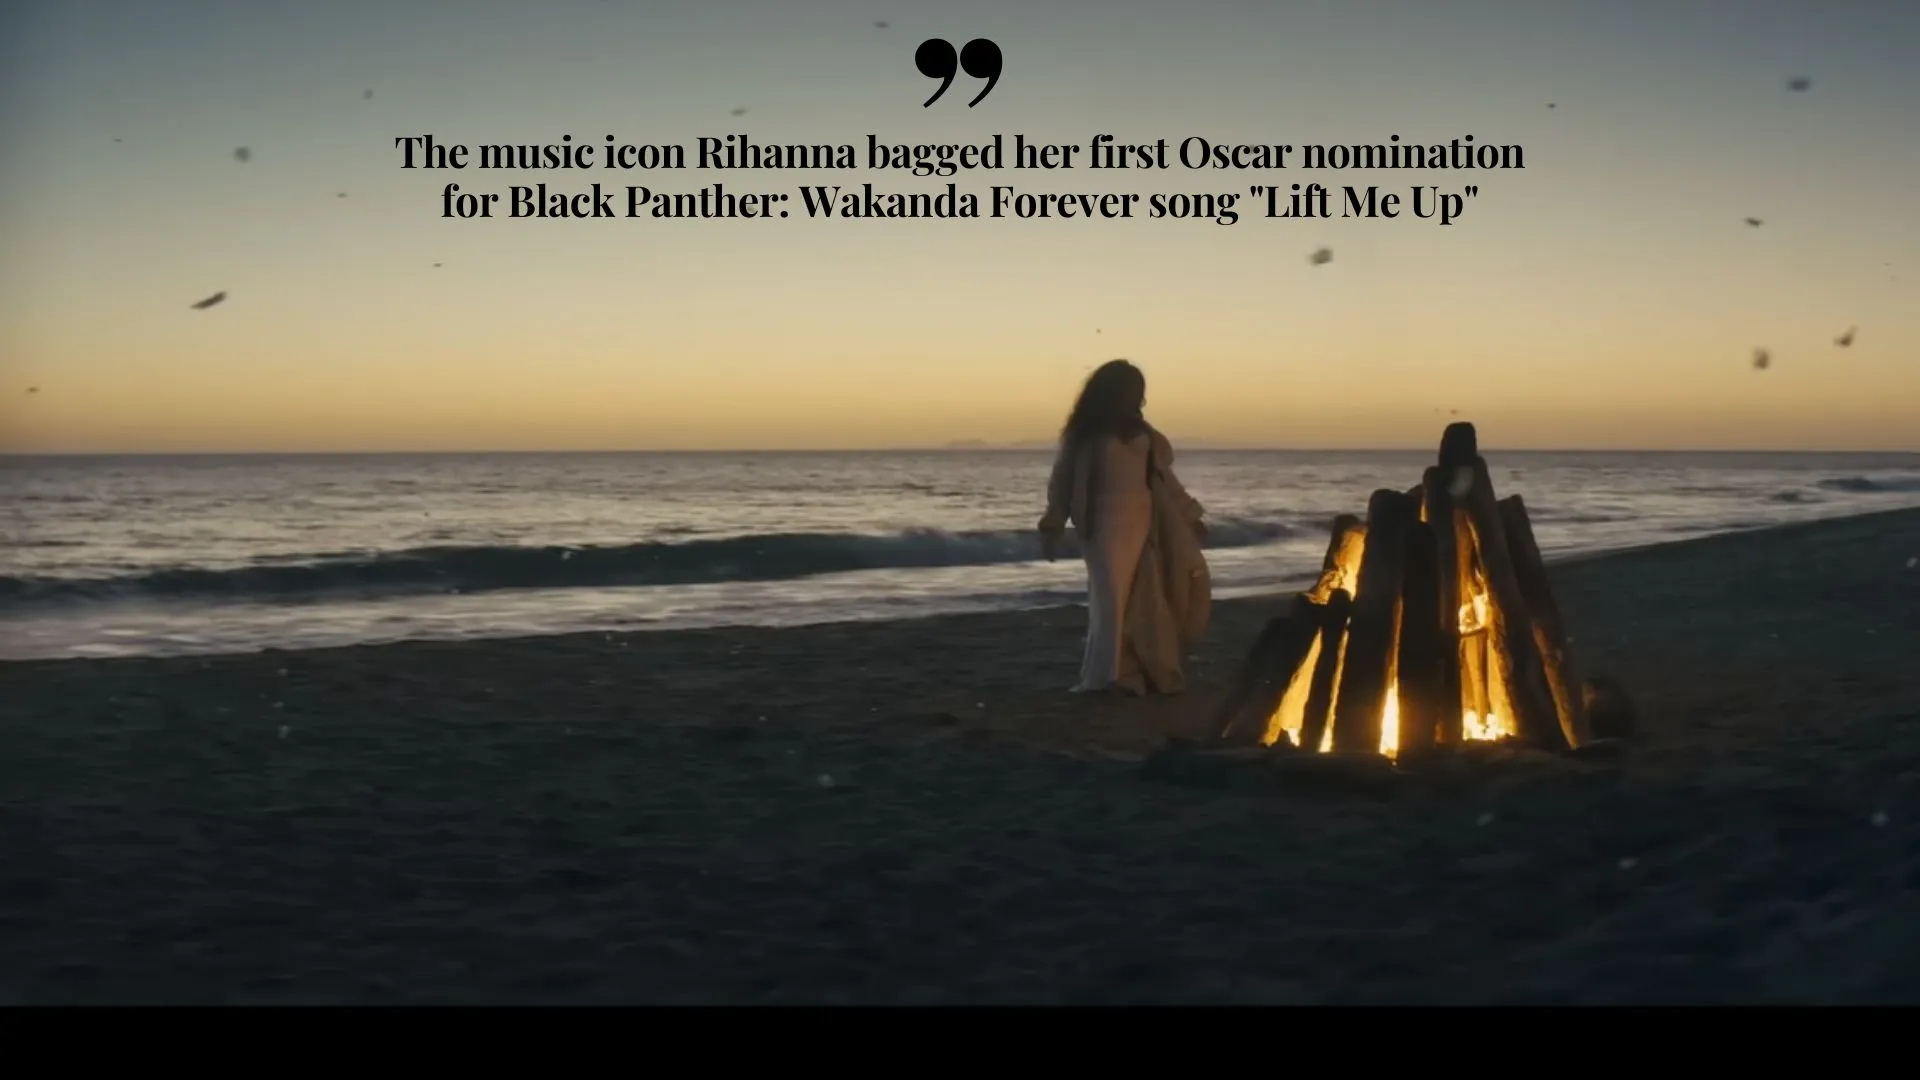 The music icon Rihanna bagged her first Oscar nomination for Black Panther: Wakanda Forever song "Lift Me Up" (Image credit: Youtube)